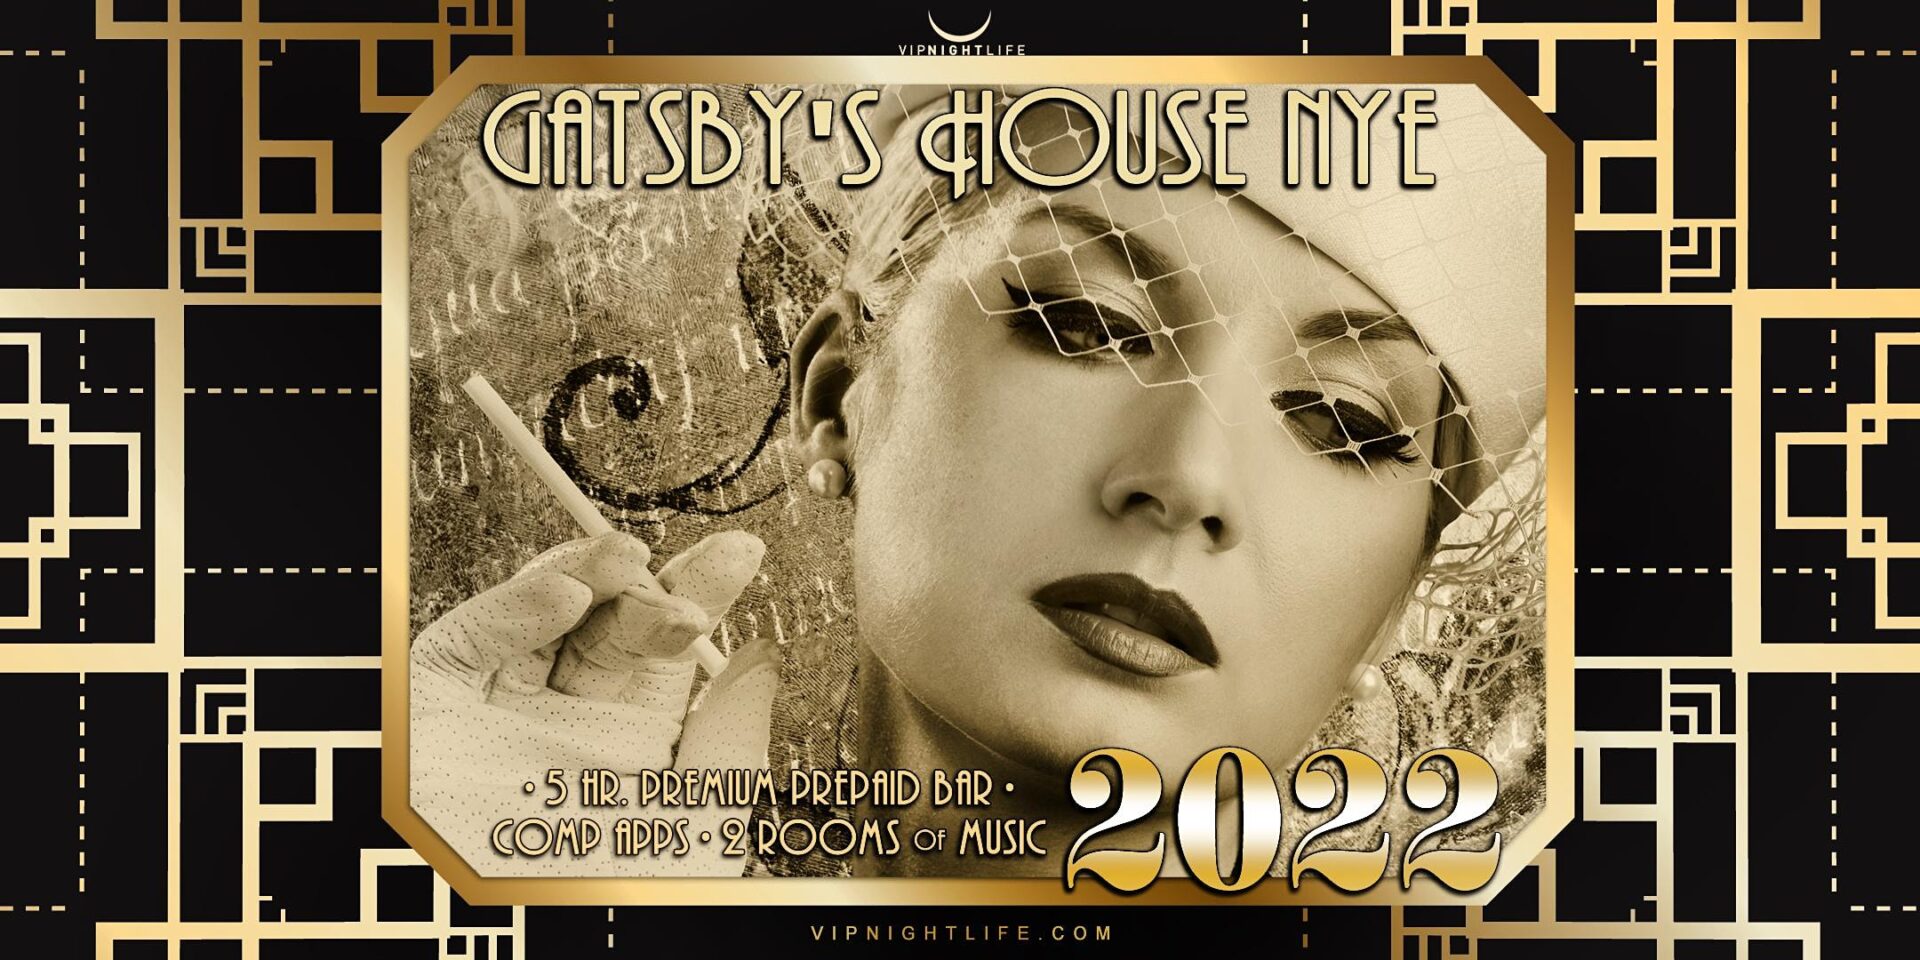 2022 Raleigh New Year's Eve Party Gatsby's House VIP Nightlife